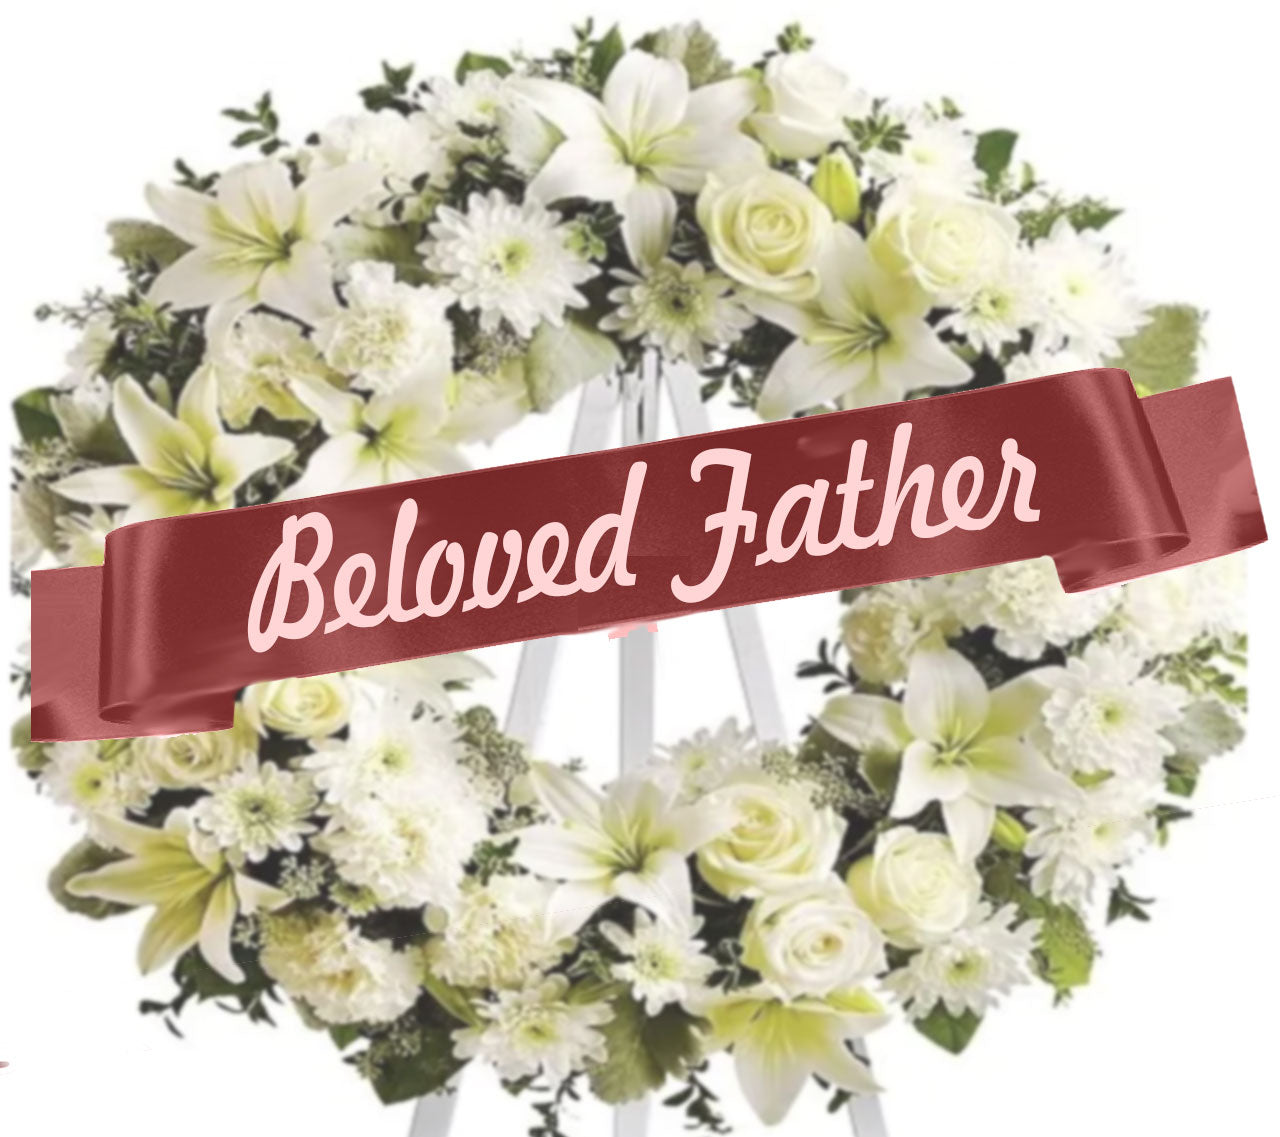 Beloved Father Funeral Flowers Ribbon